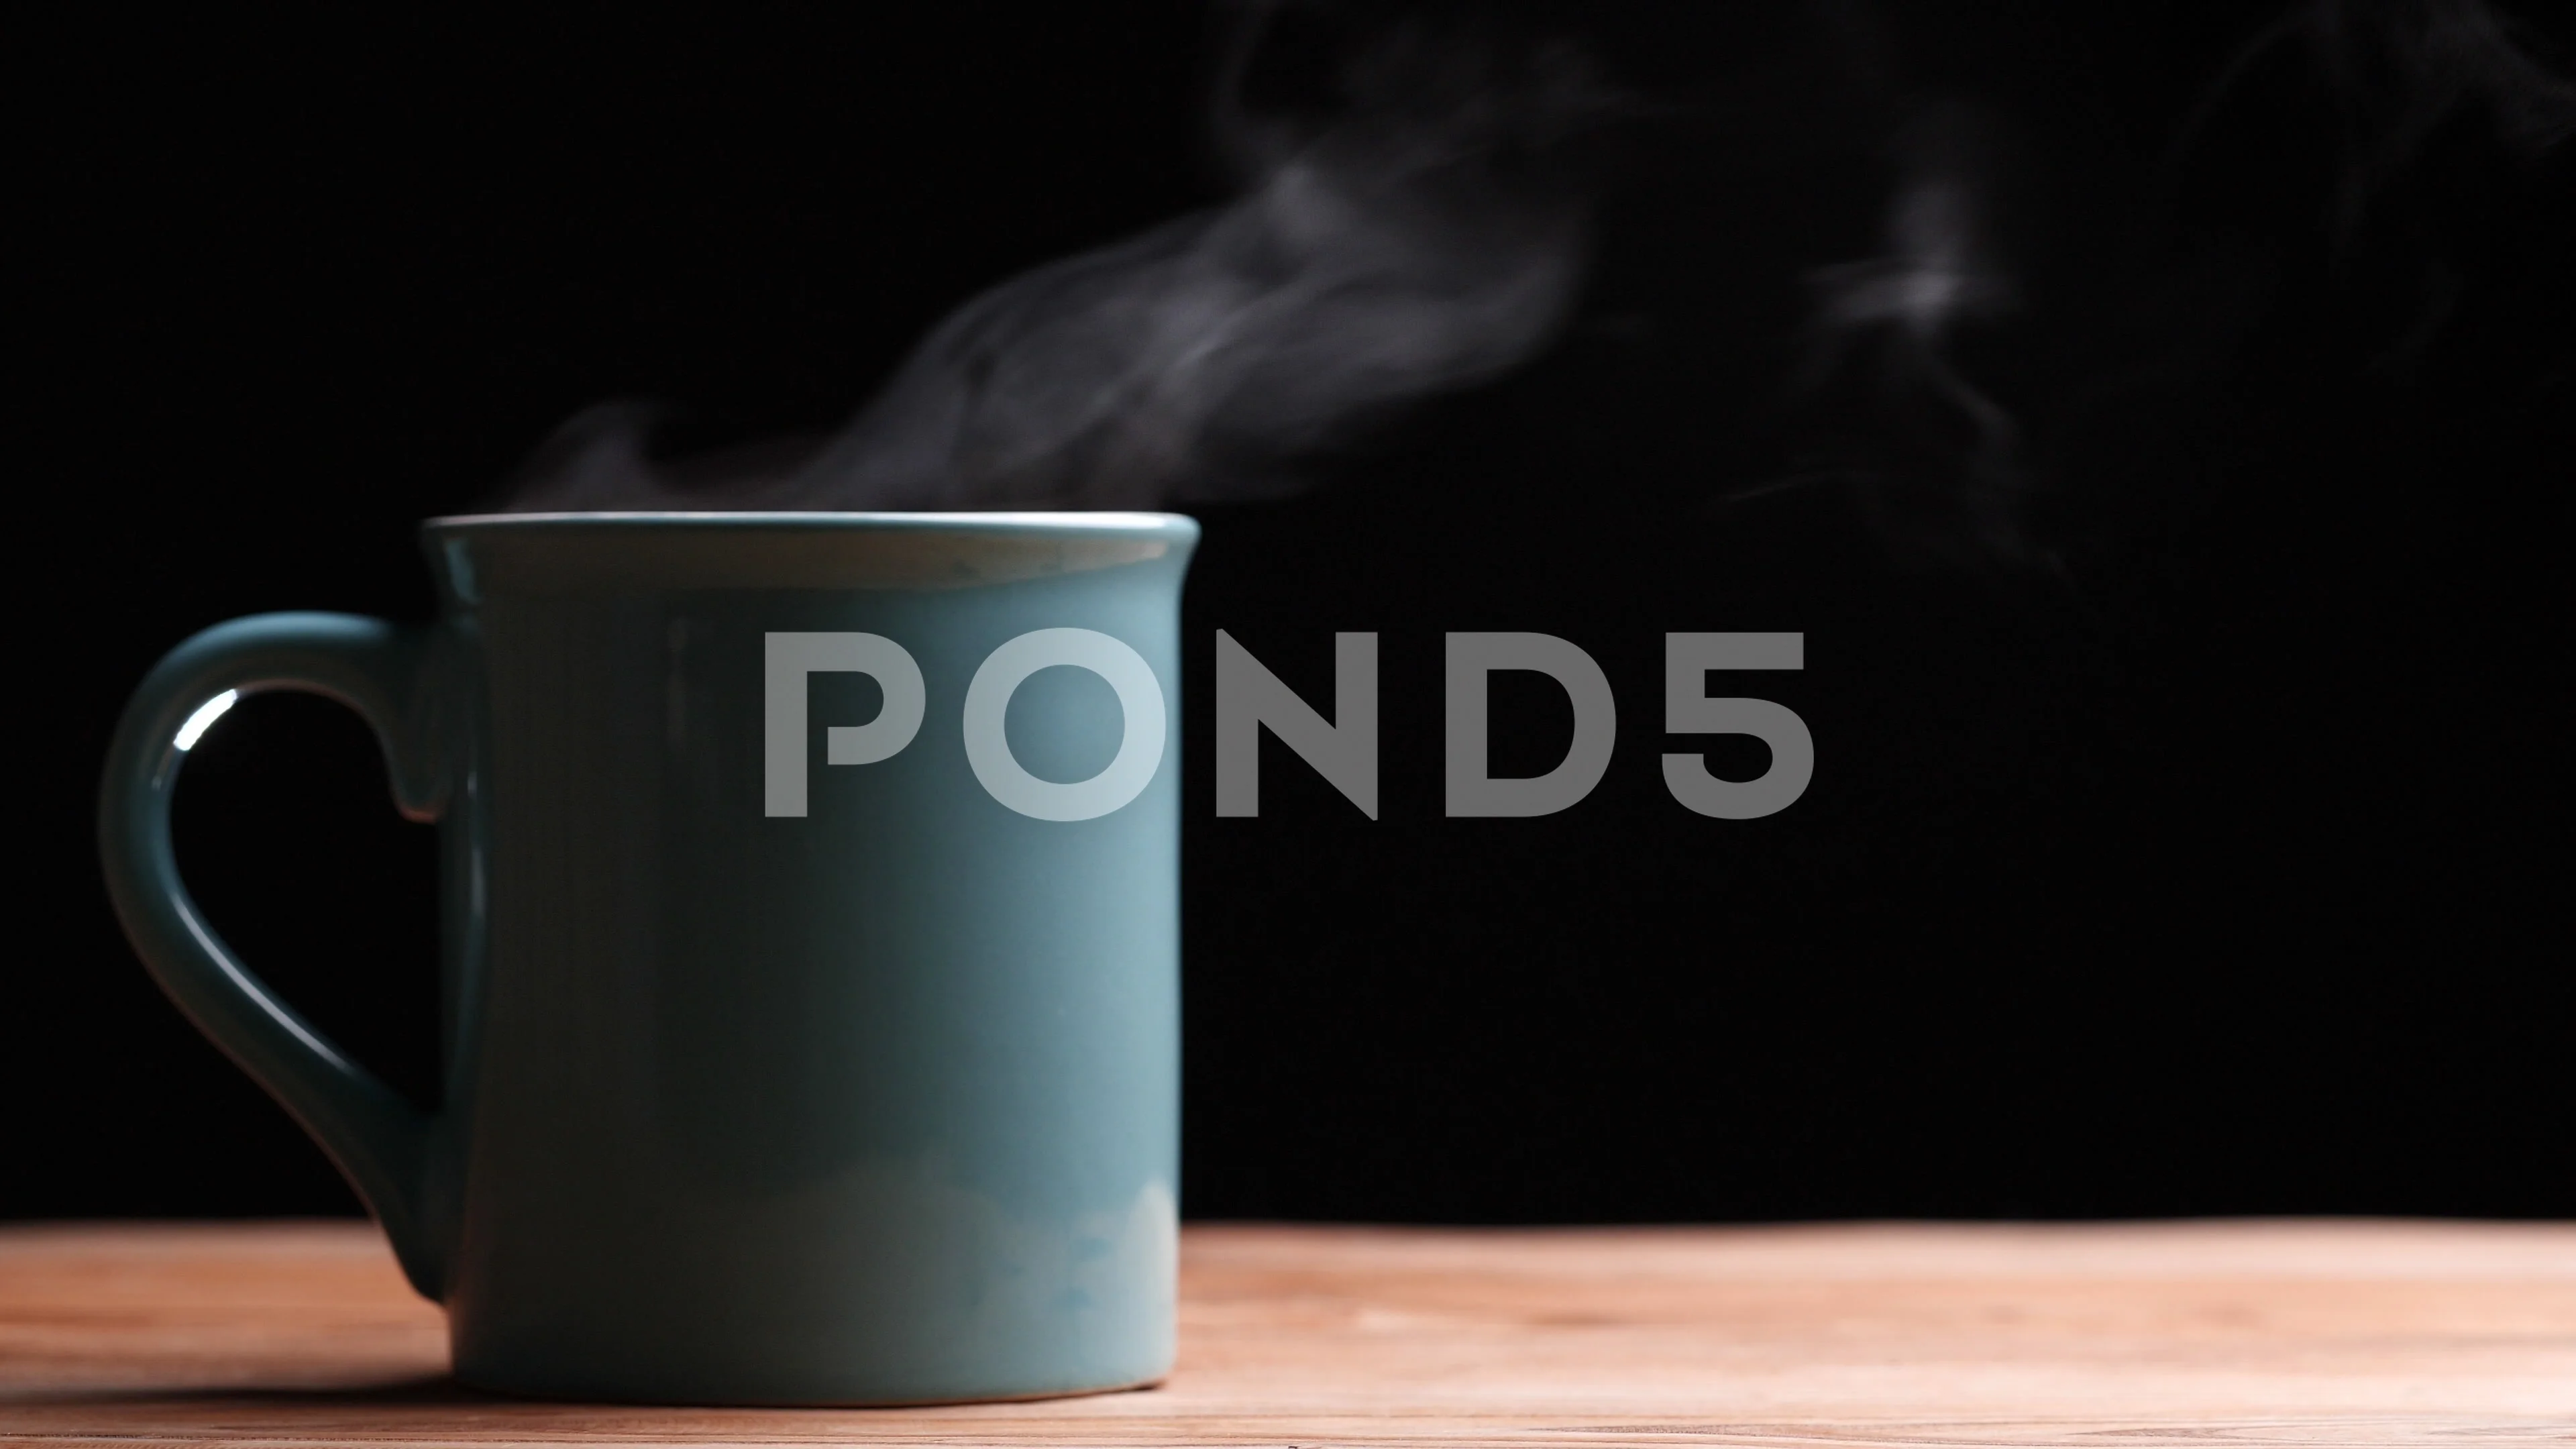 Hot Coffee Mug Closeup Natural Steam Smoke Of Coffee From Hot Coffee Cup On  Old Wooden Table In Morning Warm Sunshine Flare Outdoor View Background  Concept Hot Drink Espresso Breakfast Stock Photo 